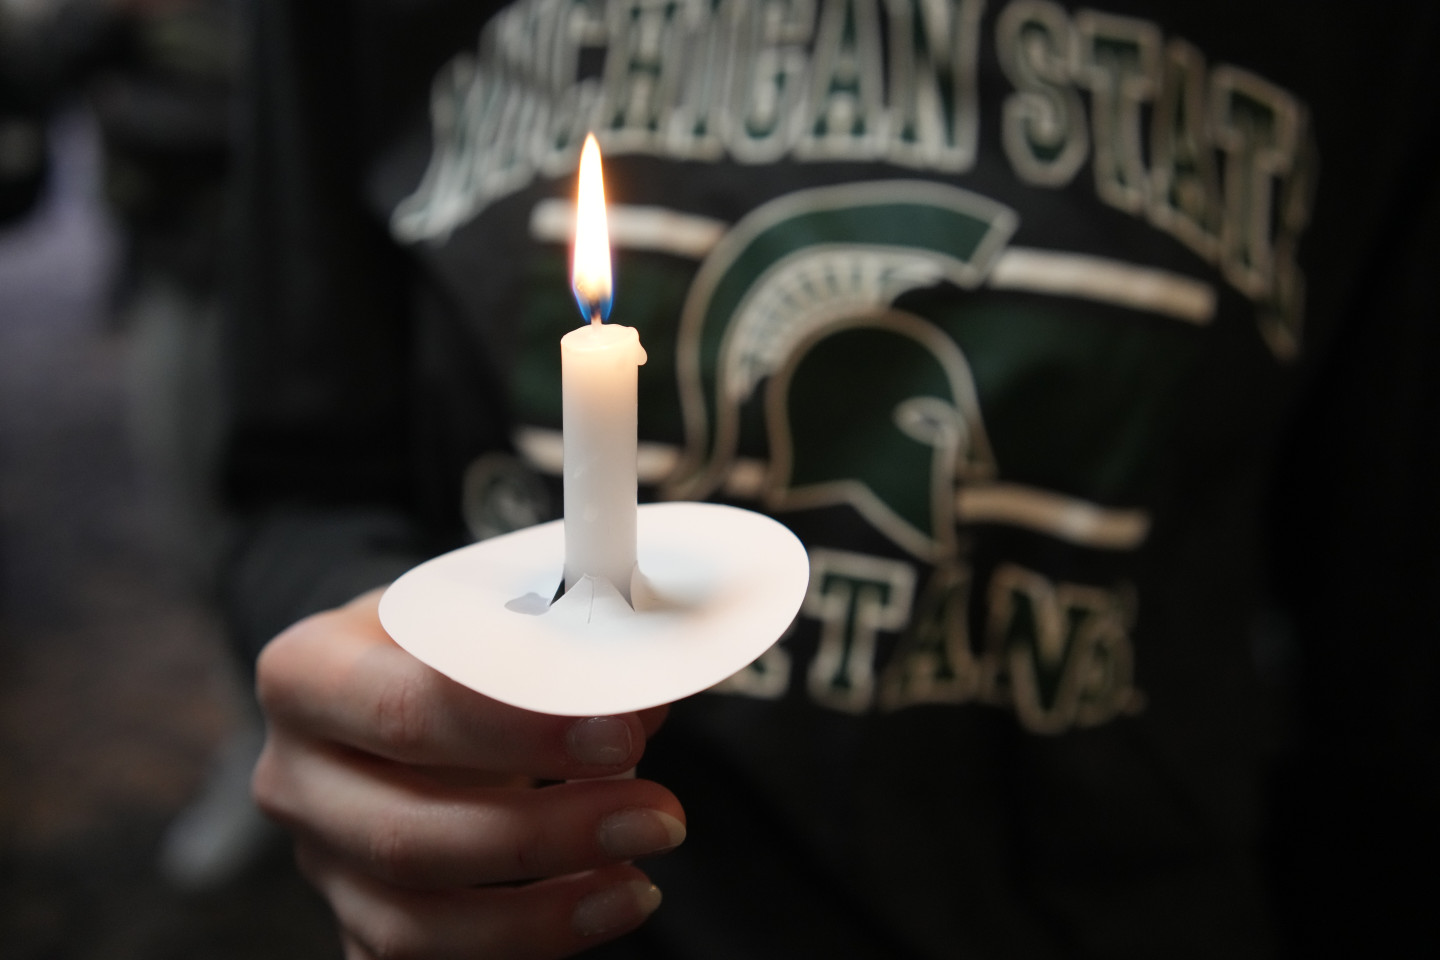 A close-up view of a hand holding a white candle.